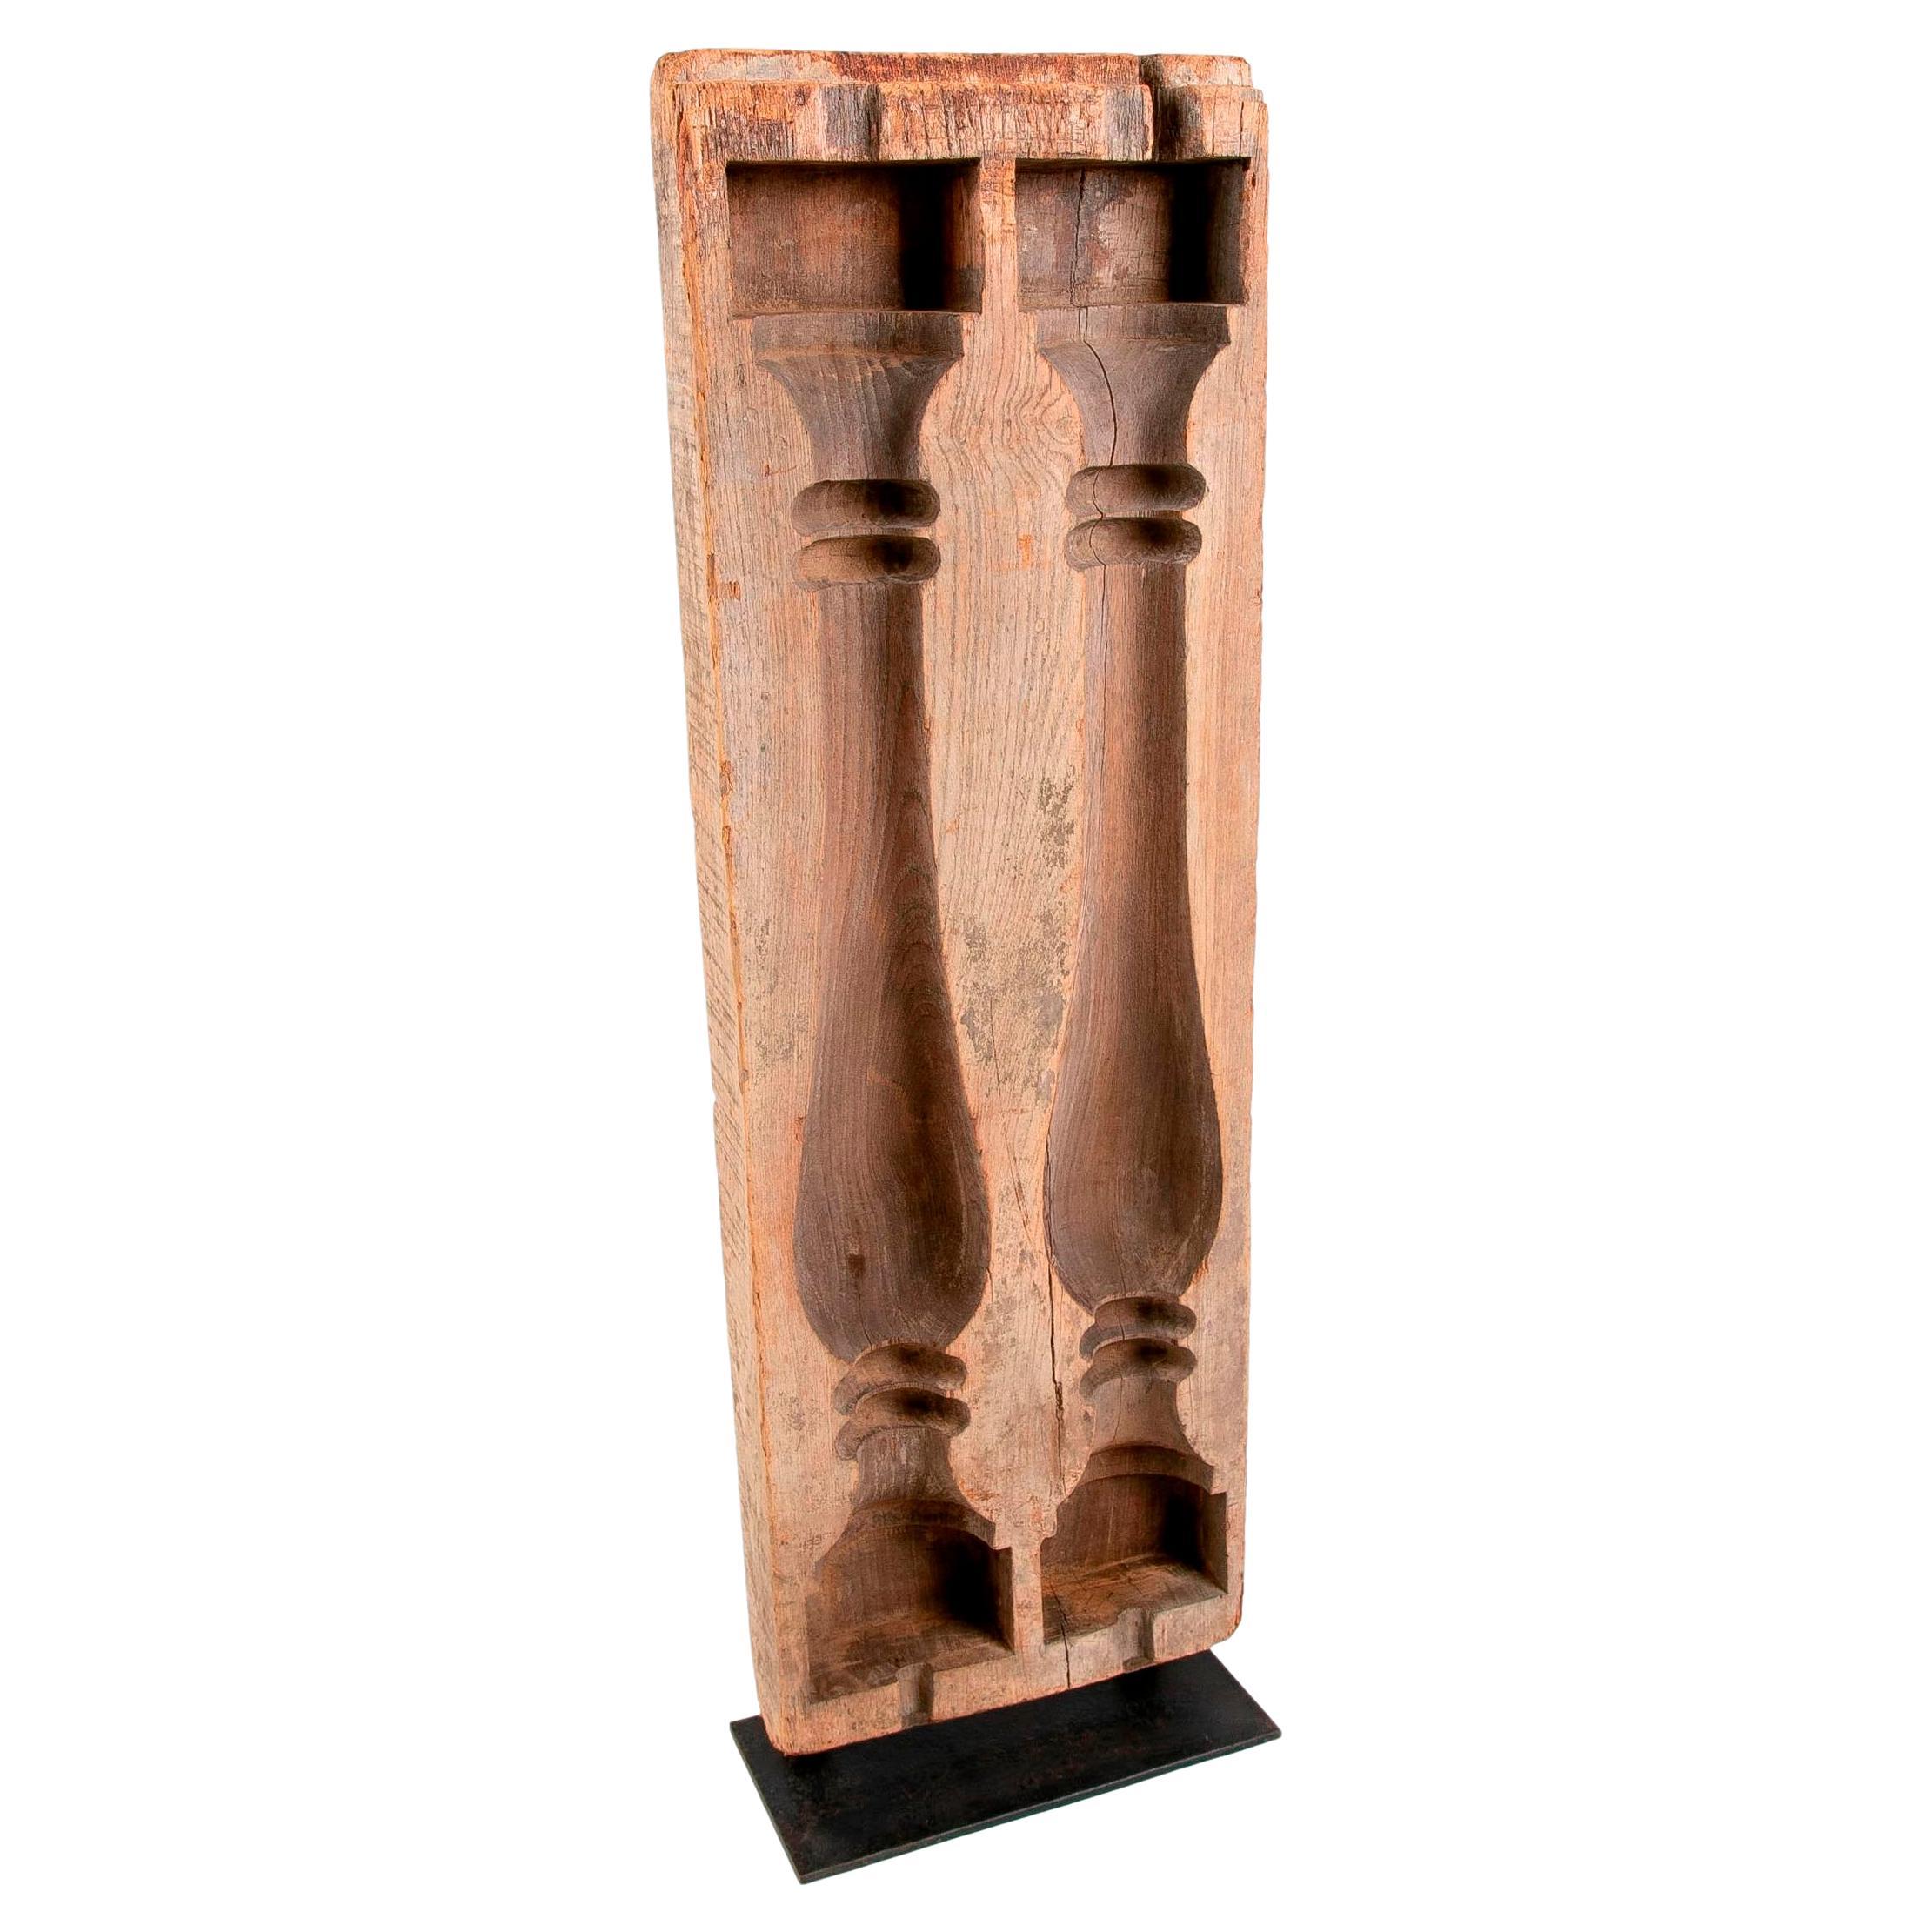 Wooden Mould for Manufacturing Original Balustrades with Decorative Iron Base For Sale